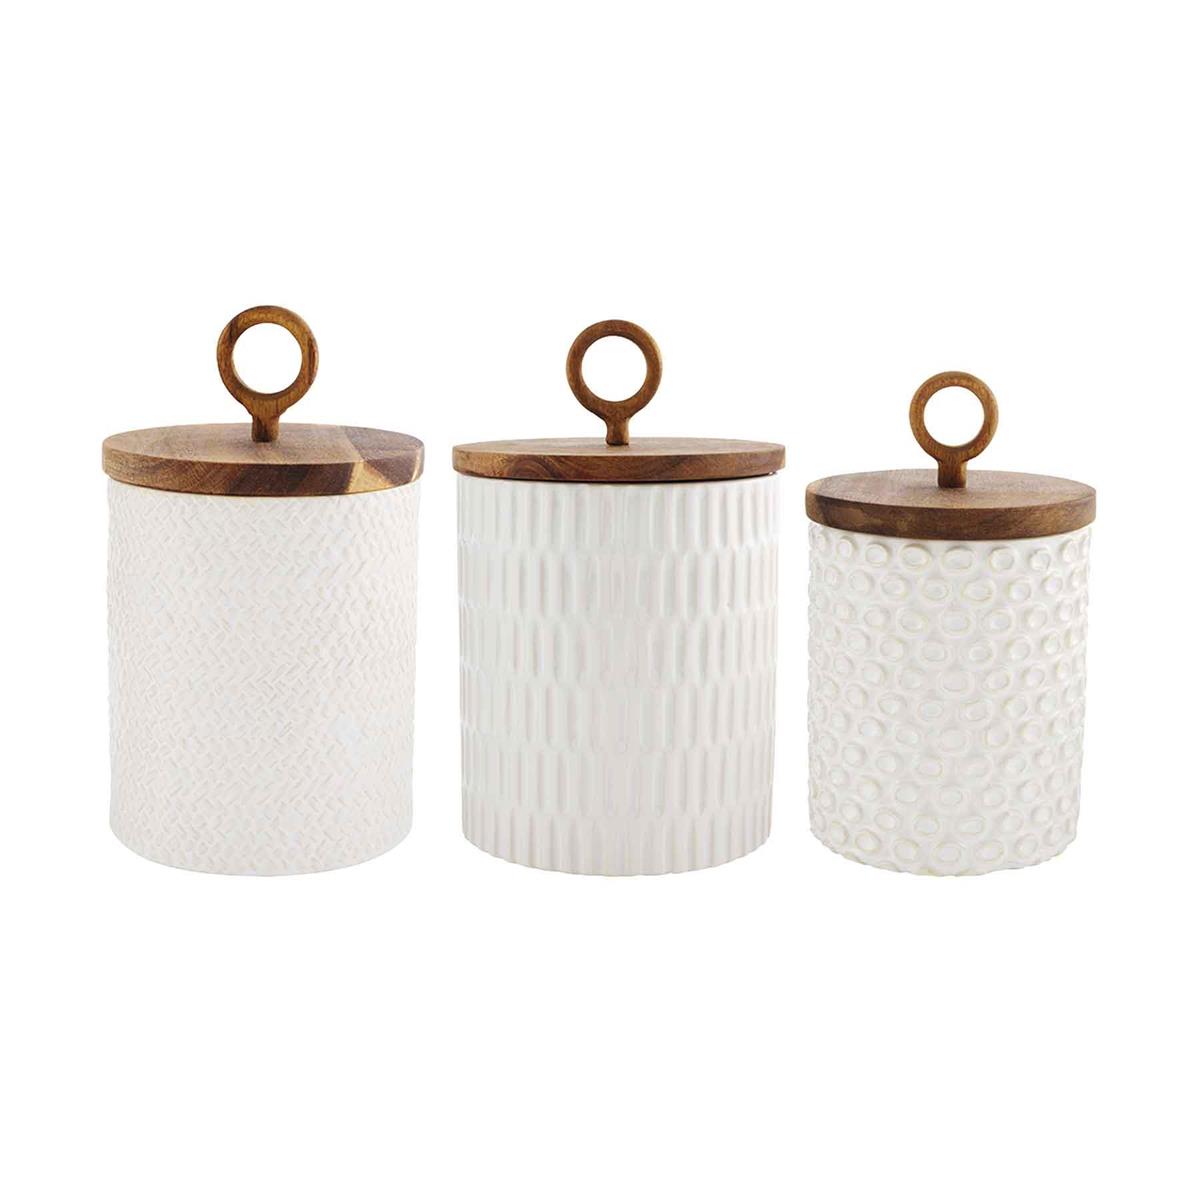 all three sizes of the textured stoneware canister set on a white background